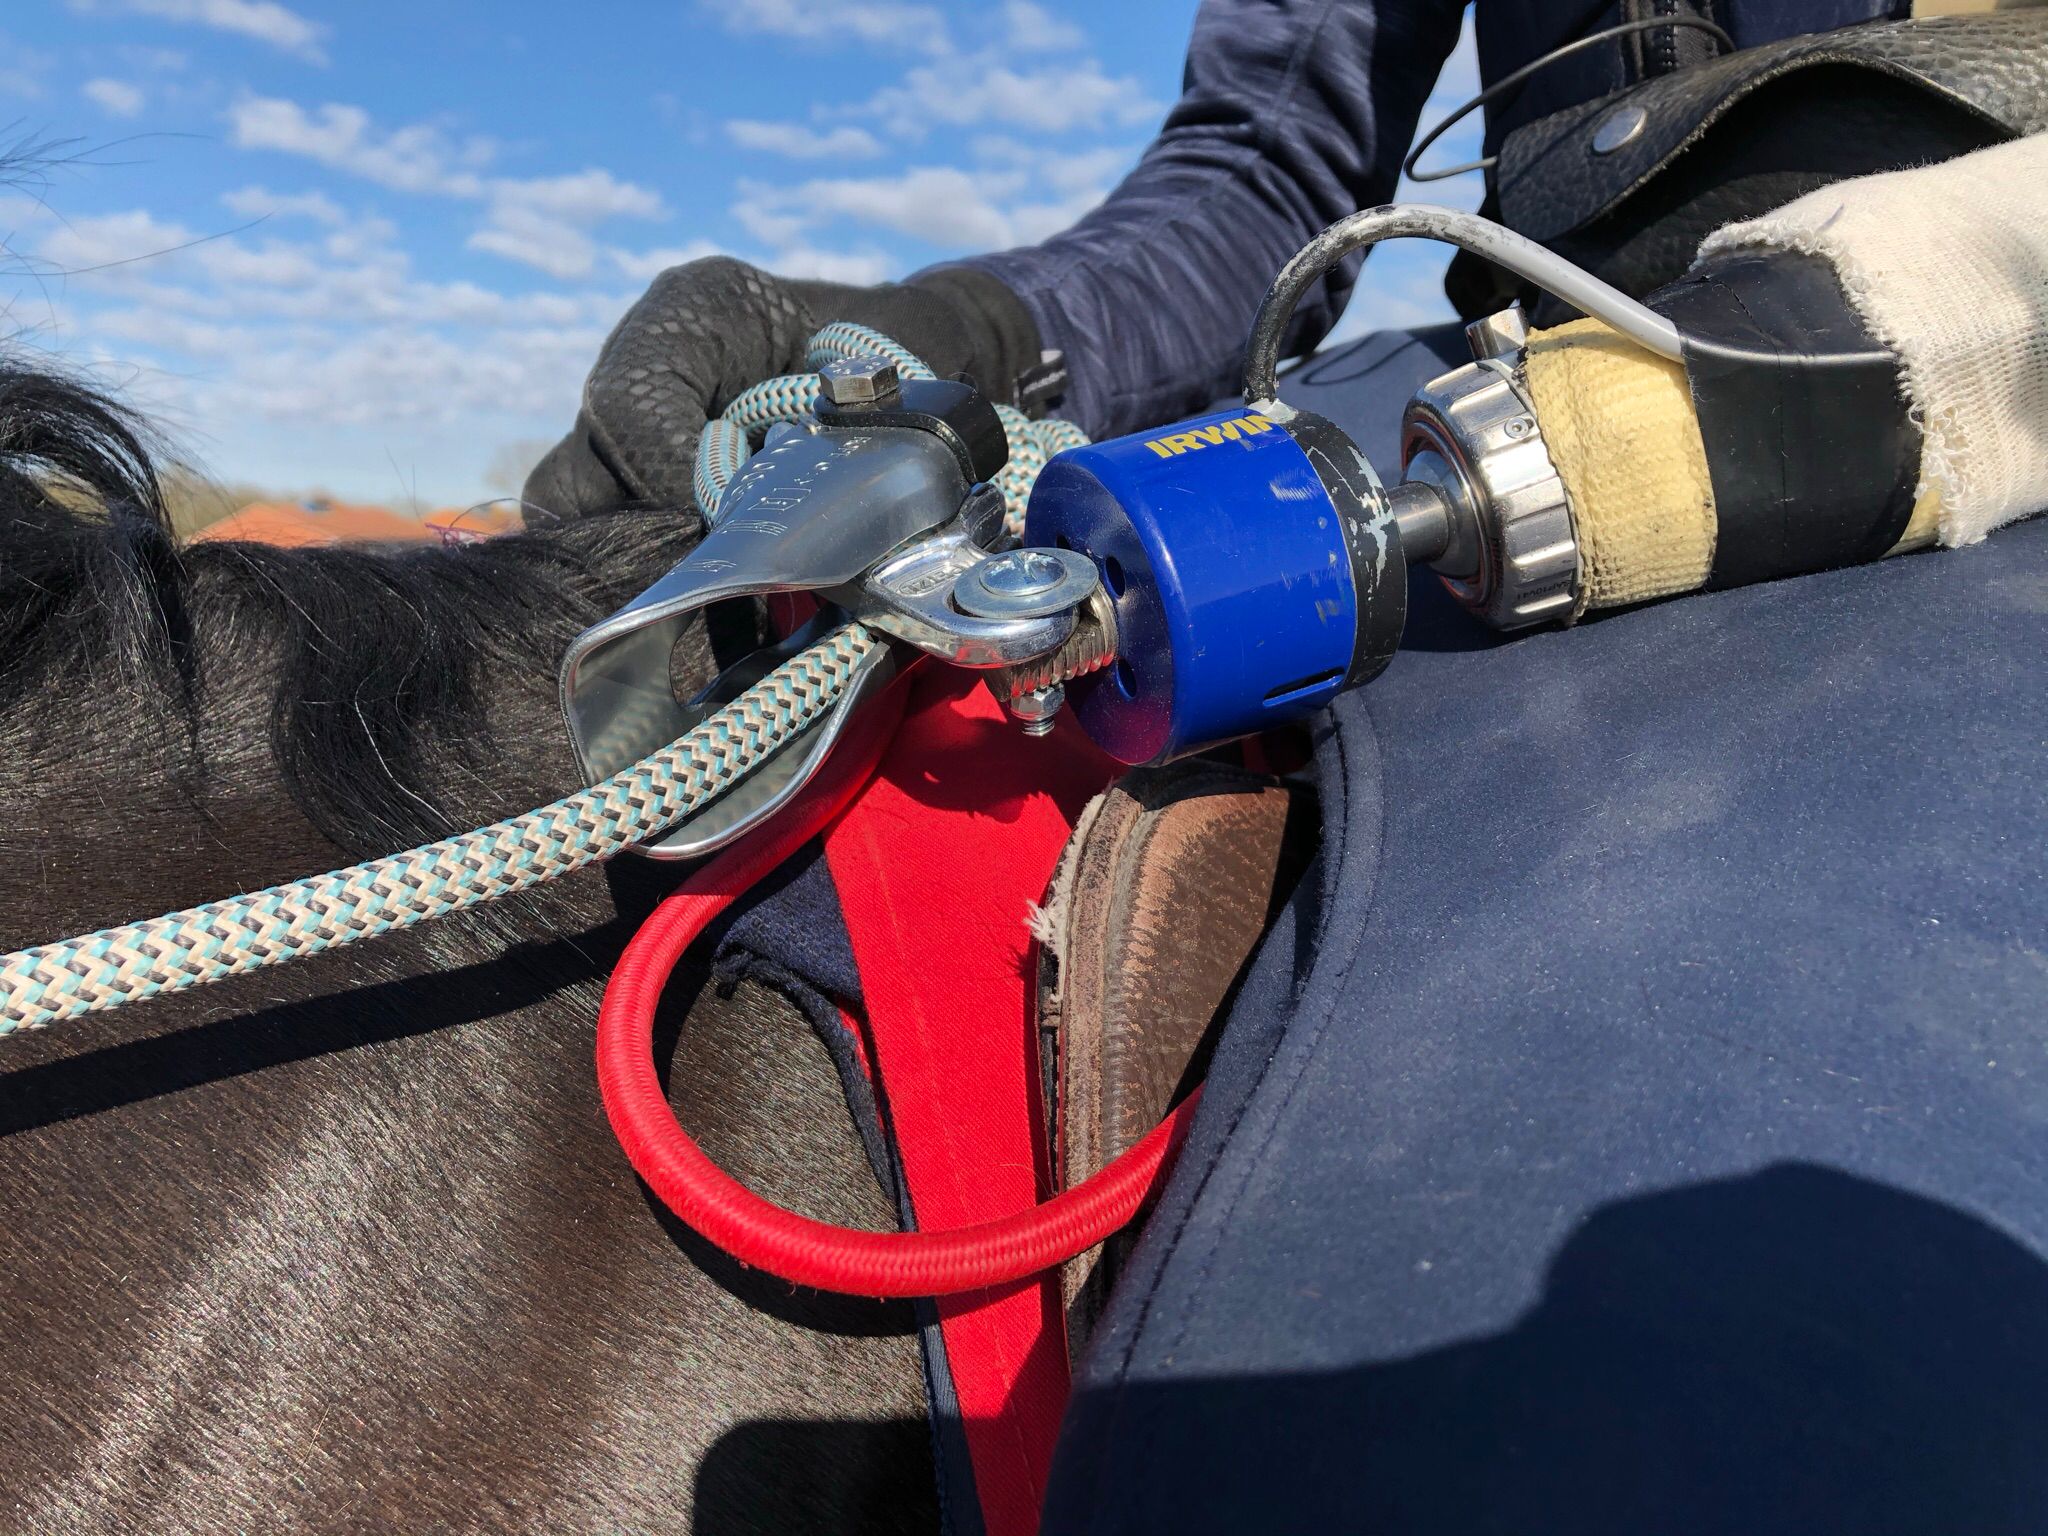 Harry Enright’s prosthetic arm with the device attached to the reins. If he falls off, the plug is pulled out of the battery and it releases instantaneously. Photo: British Racing School